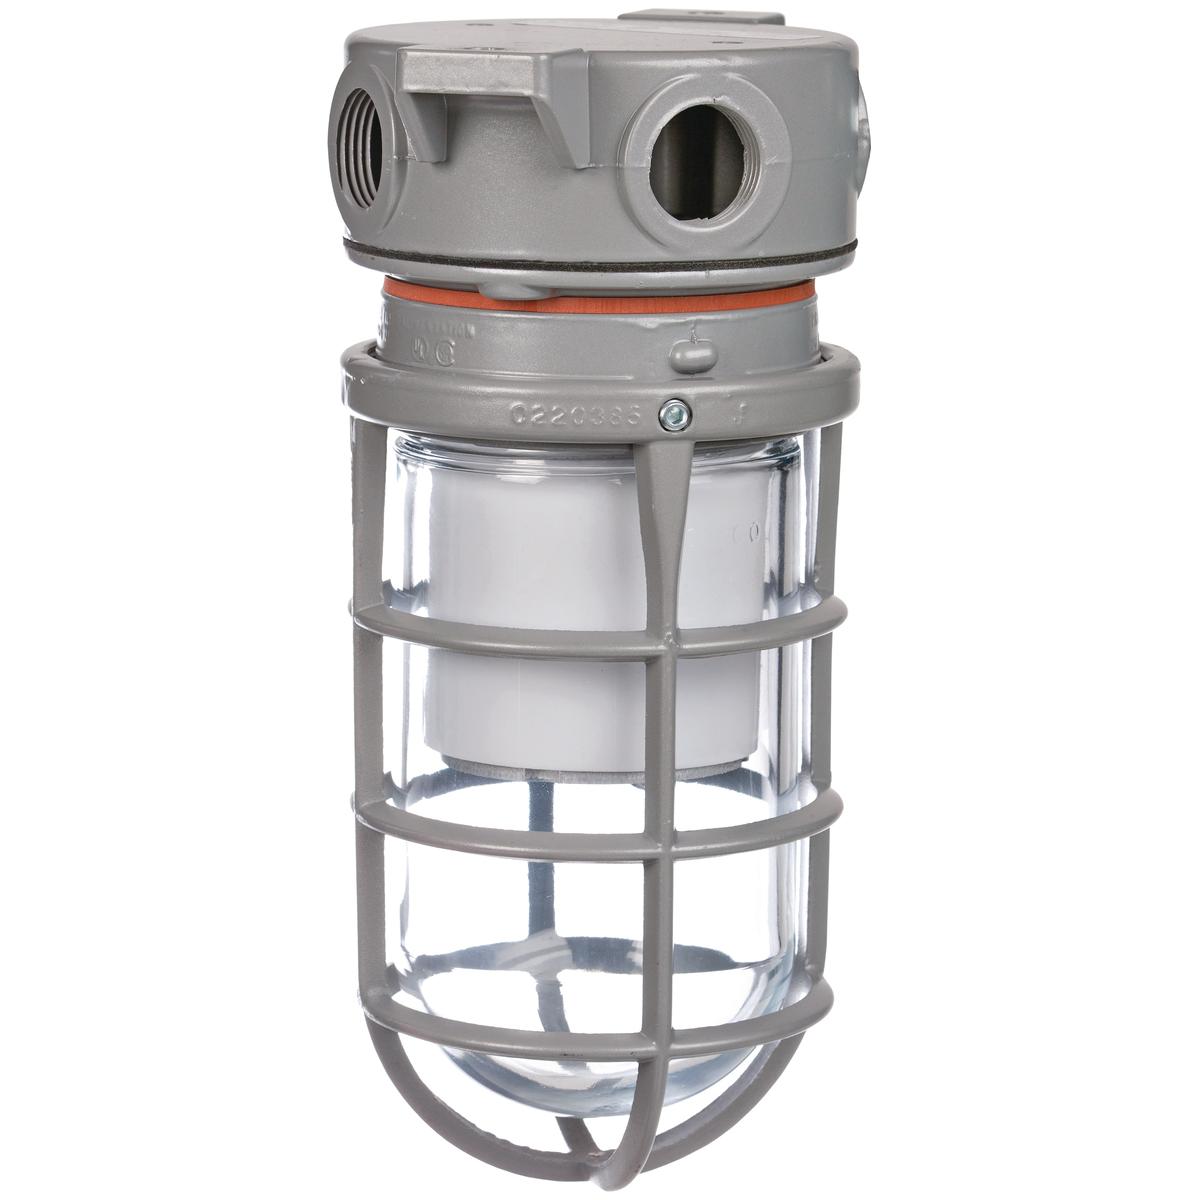 Hubbell VSL1330F1HG The VSL Series is a Vapor Tight/ Utility fixture using energy efficient LED's. This fixture is made with a cast copper-free aluminum housing and mount that is  suitable for harsh and hazardous environments. With the design of this fixtures internal heat s